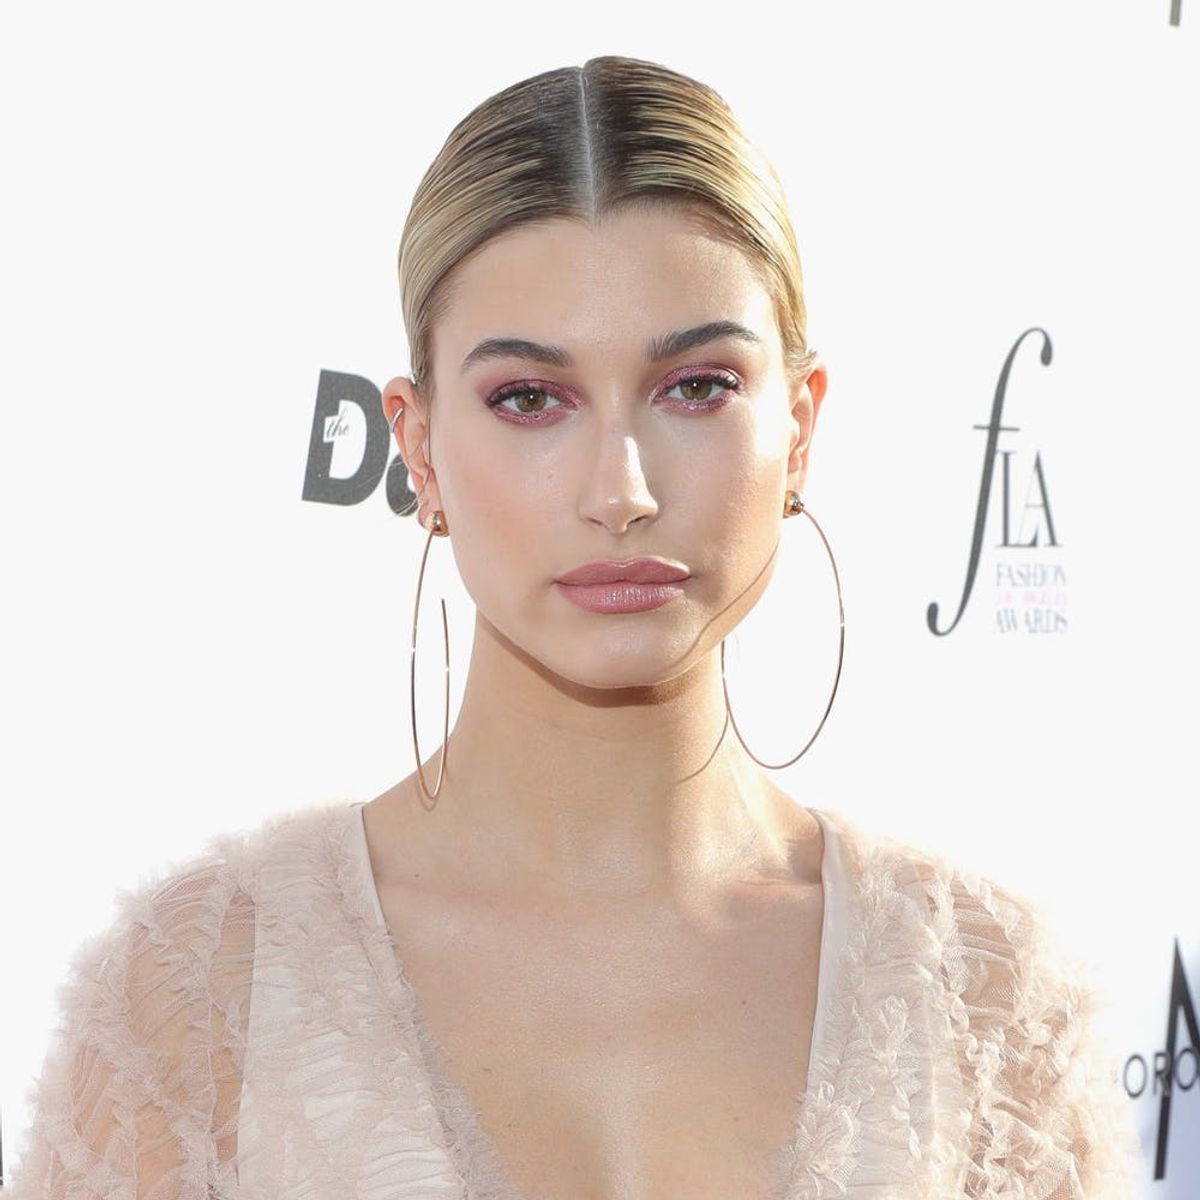 Hailey Baldwin Just Rocked a Shower Curtain Trench Coat and Made It Look Surprisingly… Cool?